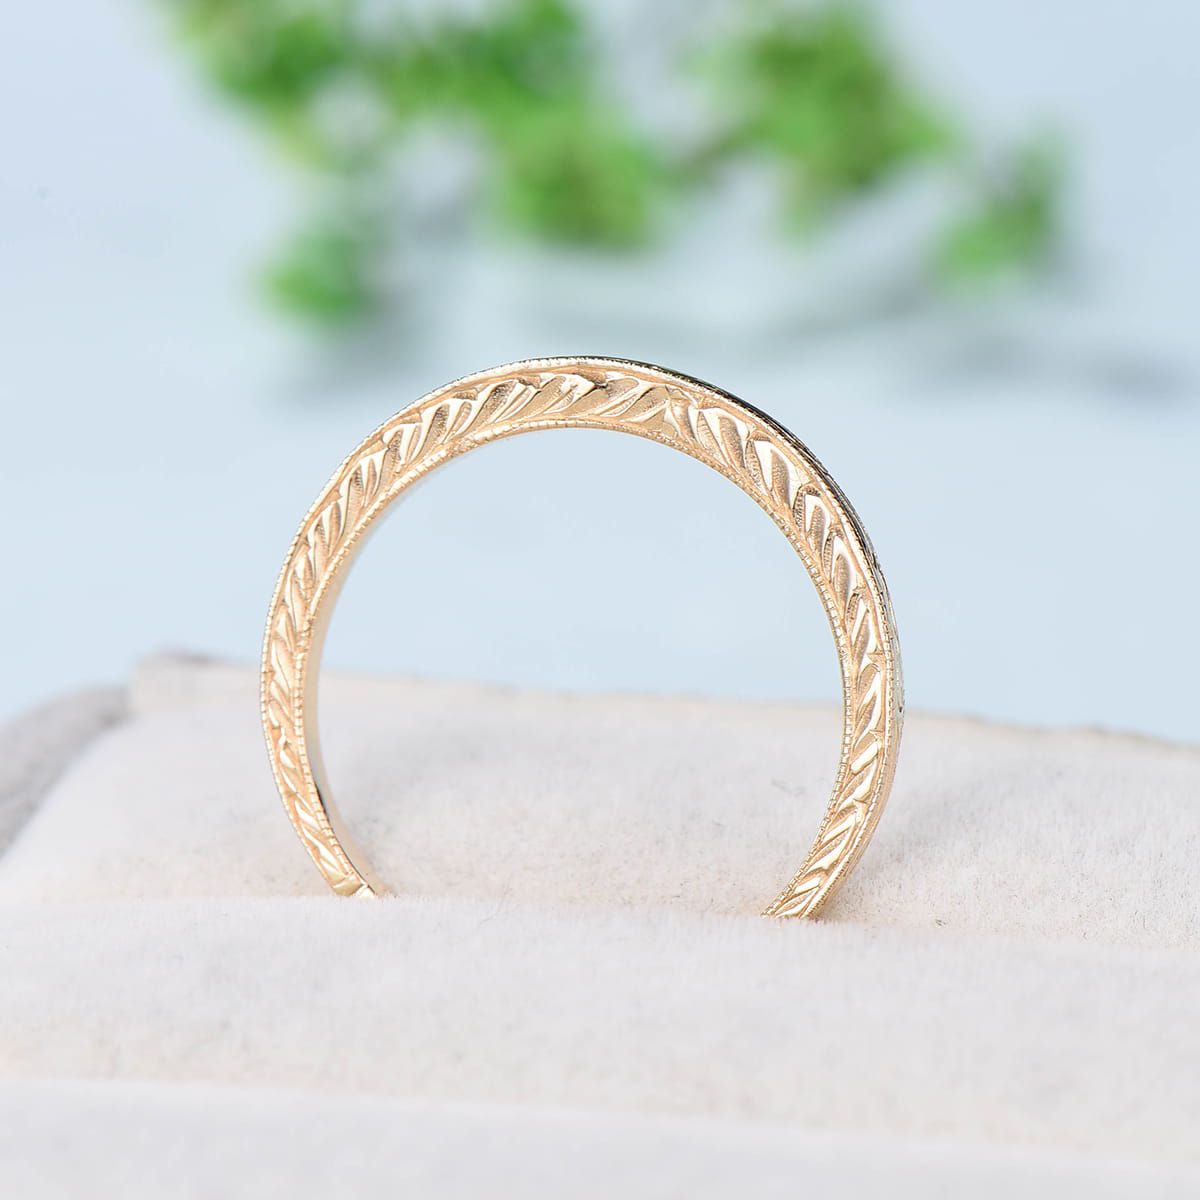 18 kt yellow gold handmade fabulous wedding engagement anniversary ring band  unisex jewelry all sizes available GR006 | TRIBAL ORNAMENTS